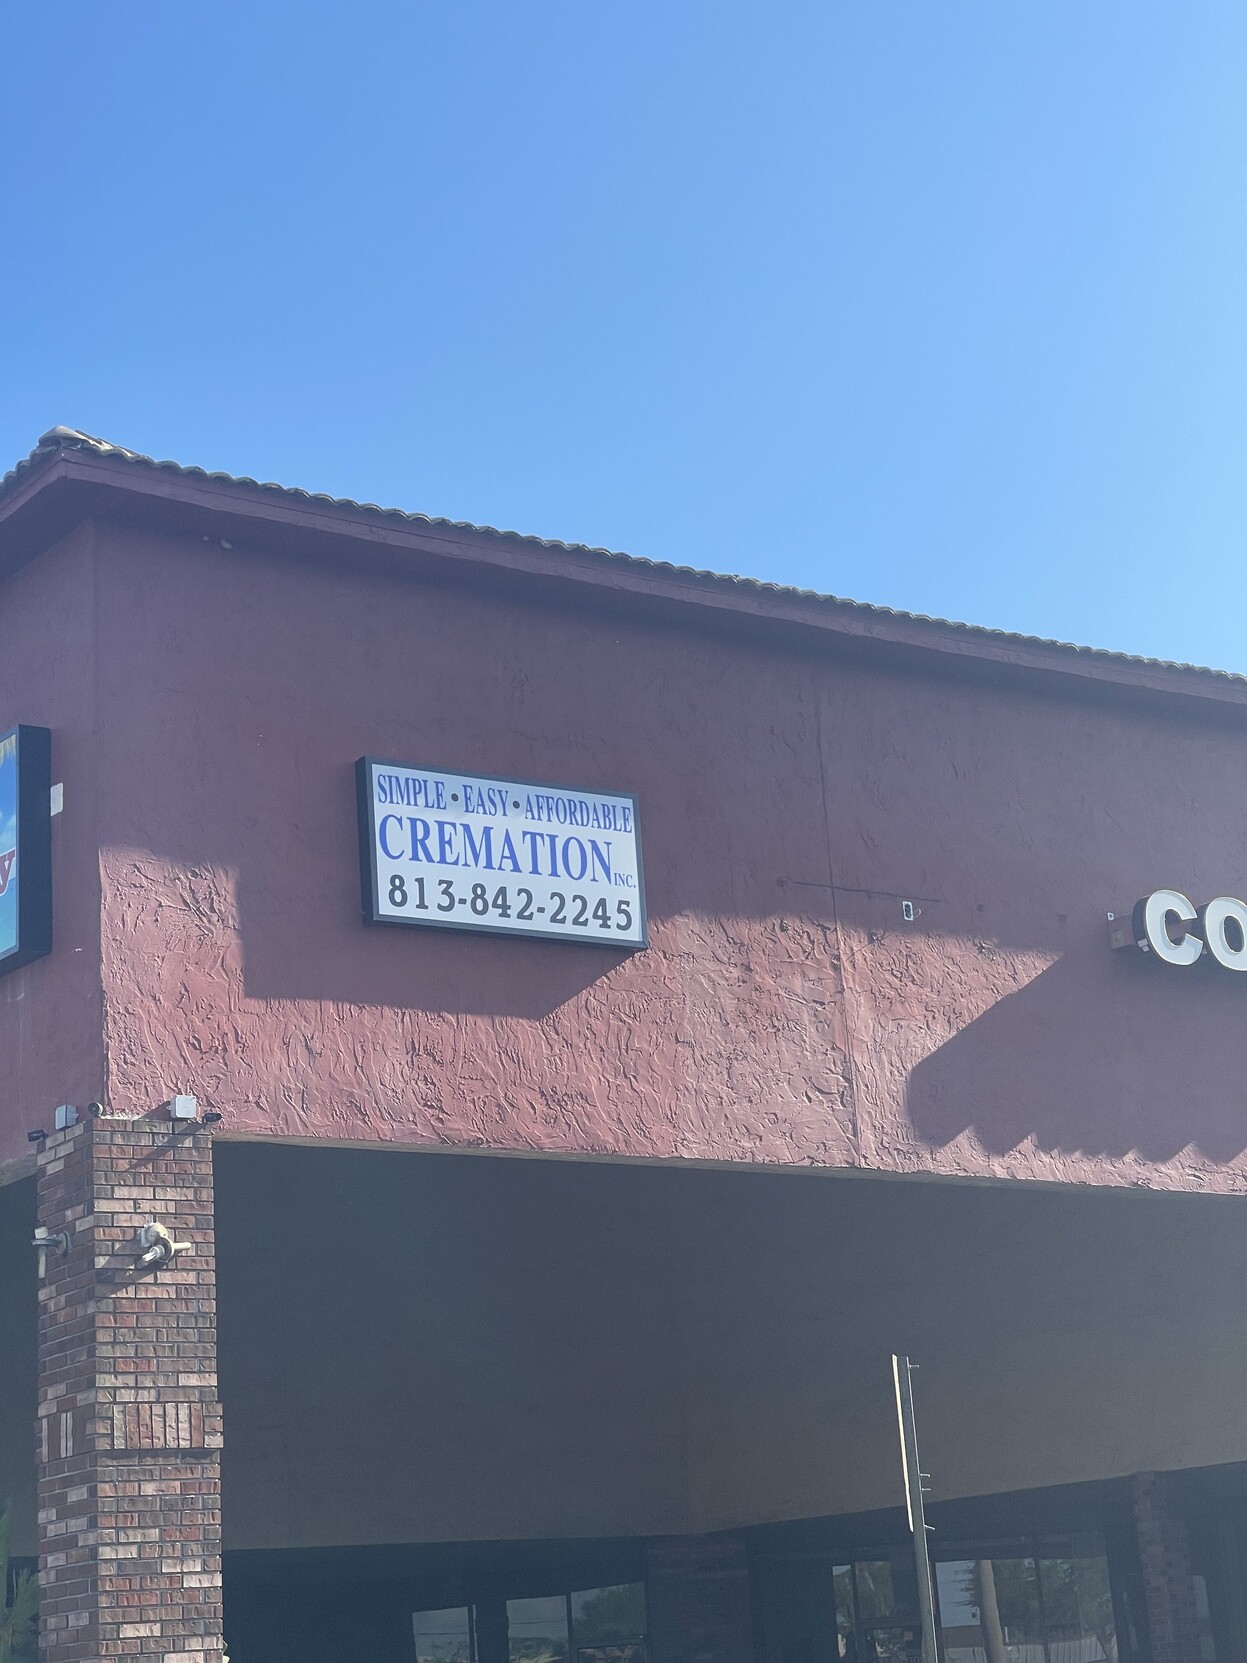 Sign says “Simple. Easy. Affordable. Cremation”